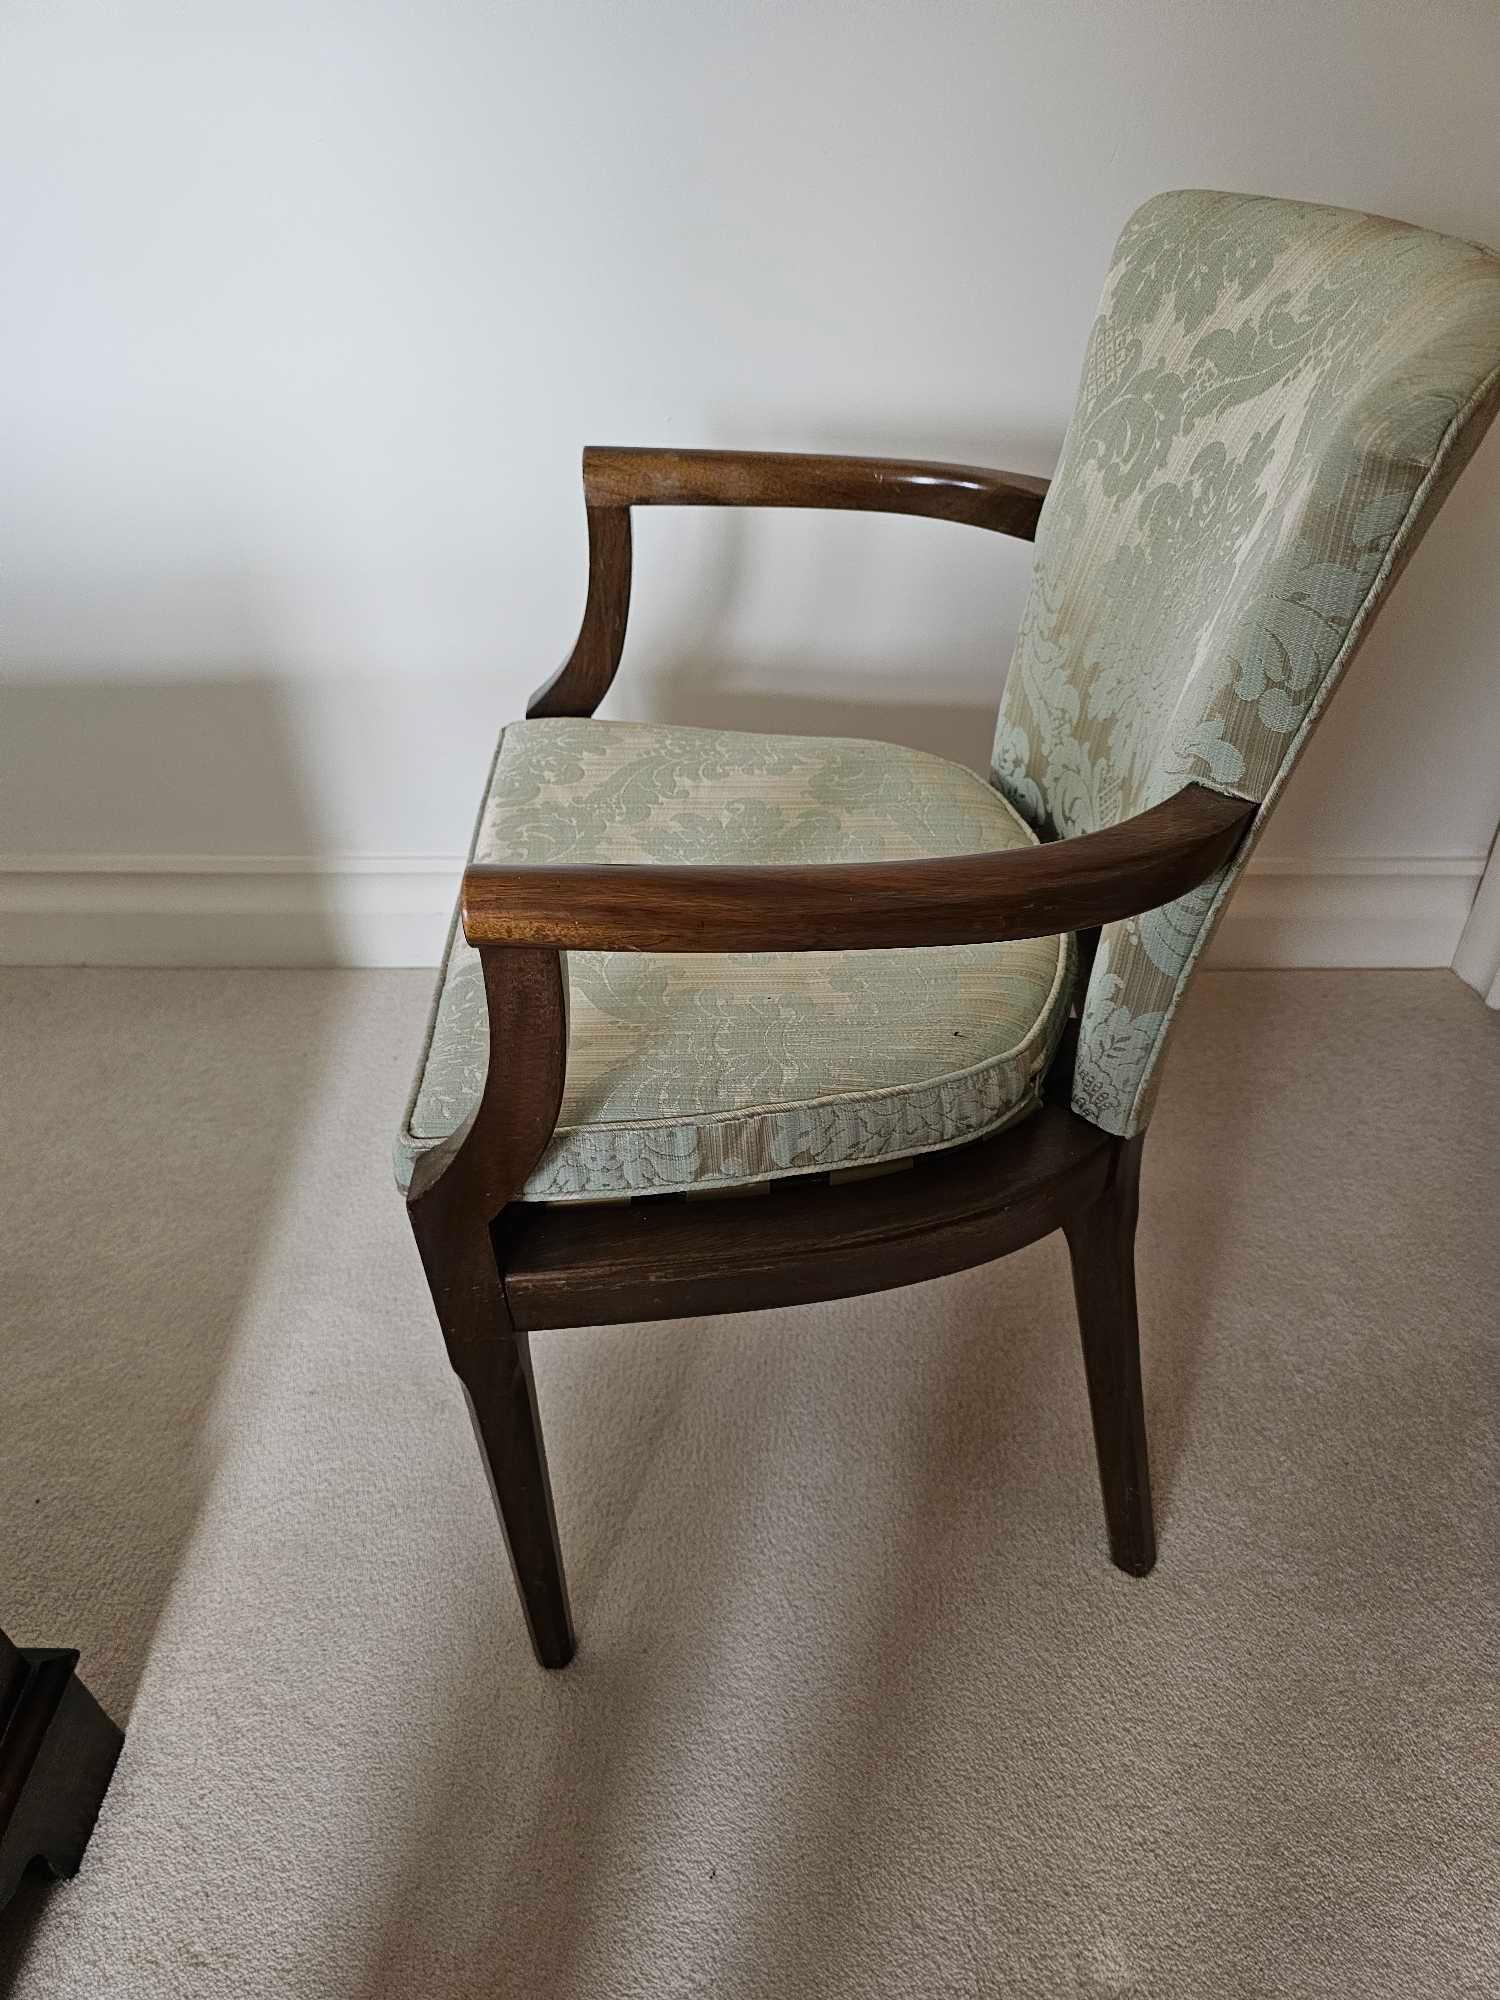 A Parker Knoll Style Armchair Upholstered In A Damask Fabric With Later Replacement Strap Banding To - Image 4 of 5